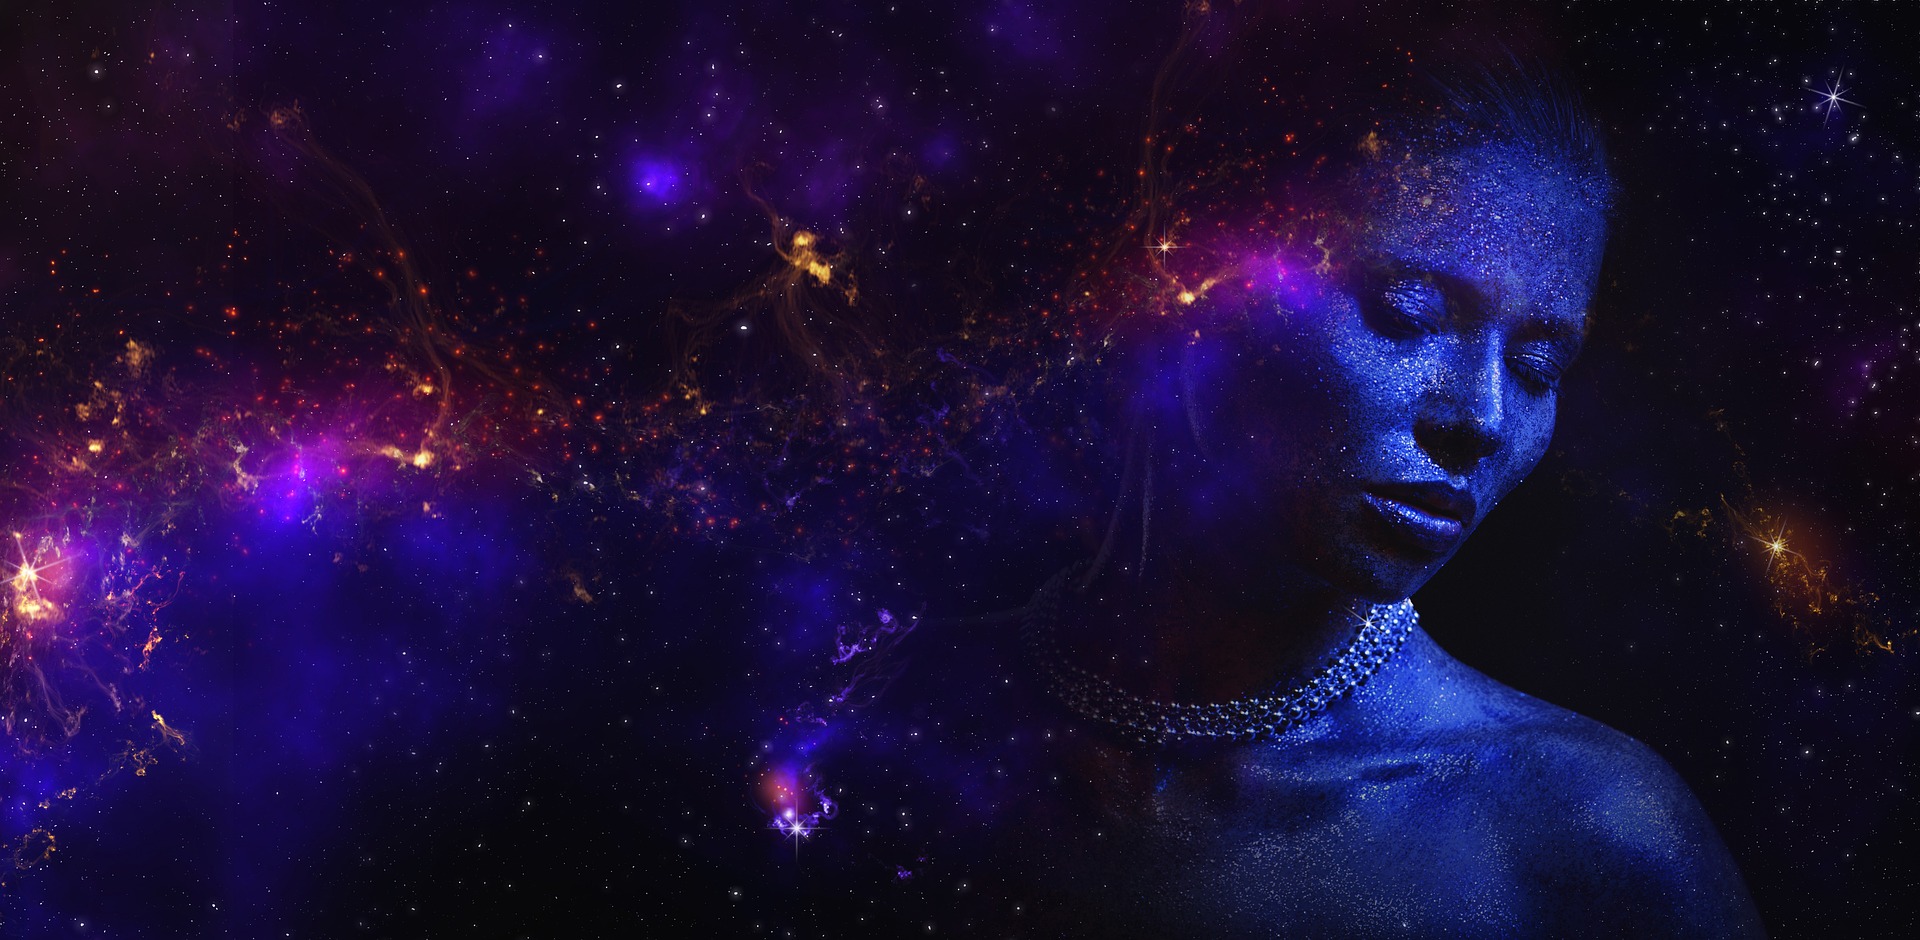 The universe appears in the mind of the diva